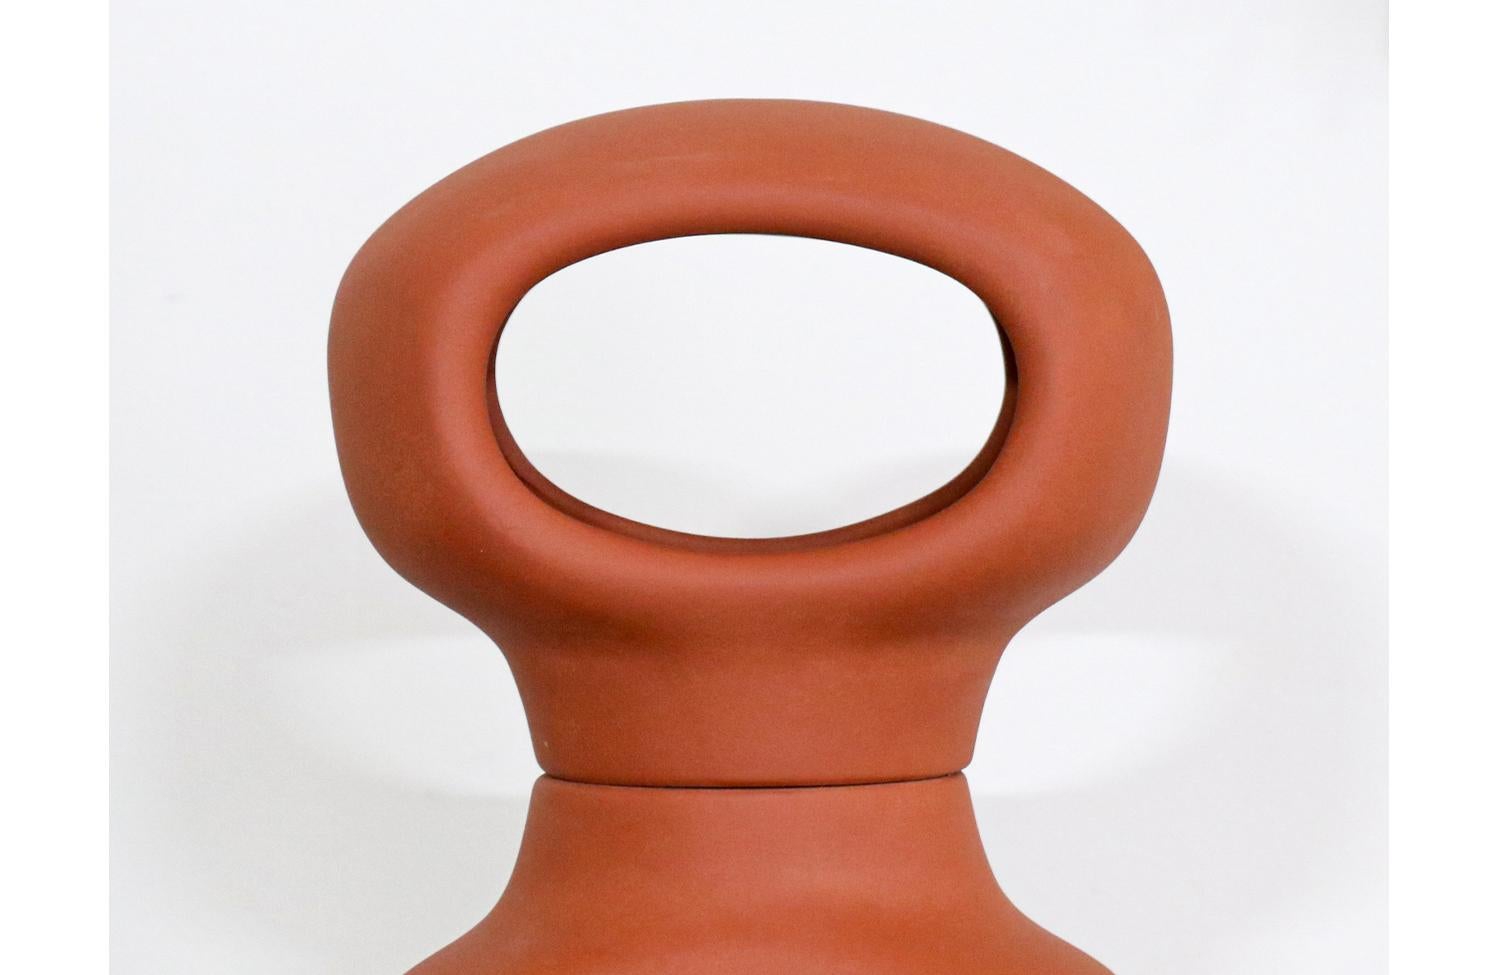 Mid-20th Century Malcolm Leland Terracotta Ceramic Floor Lantern for Architectural Pottery